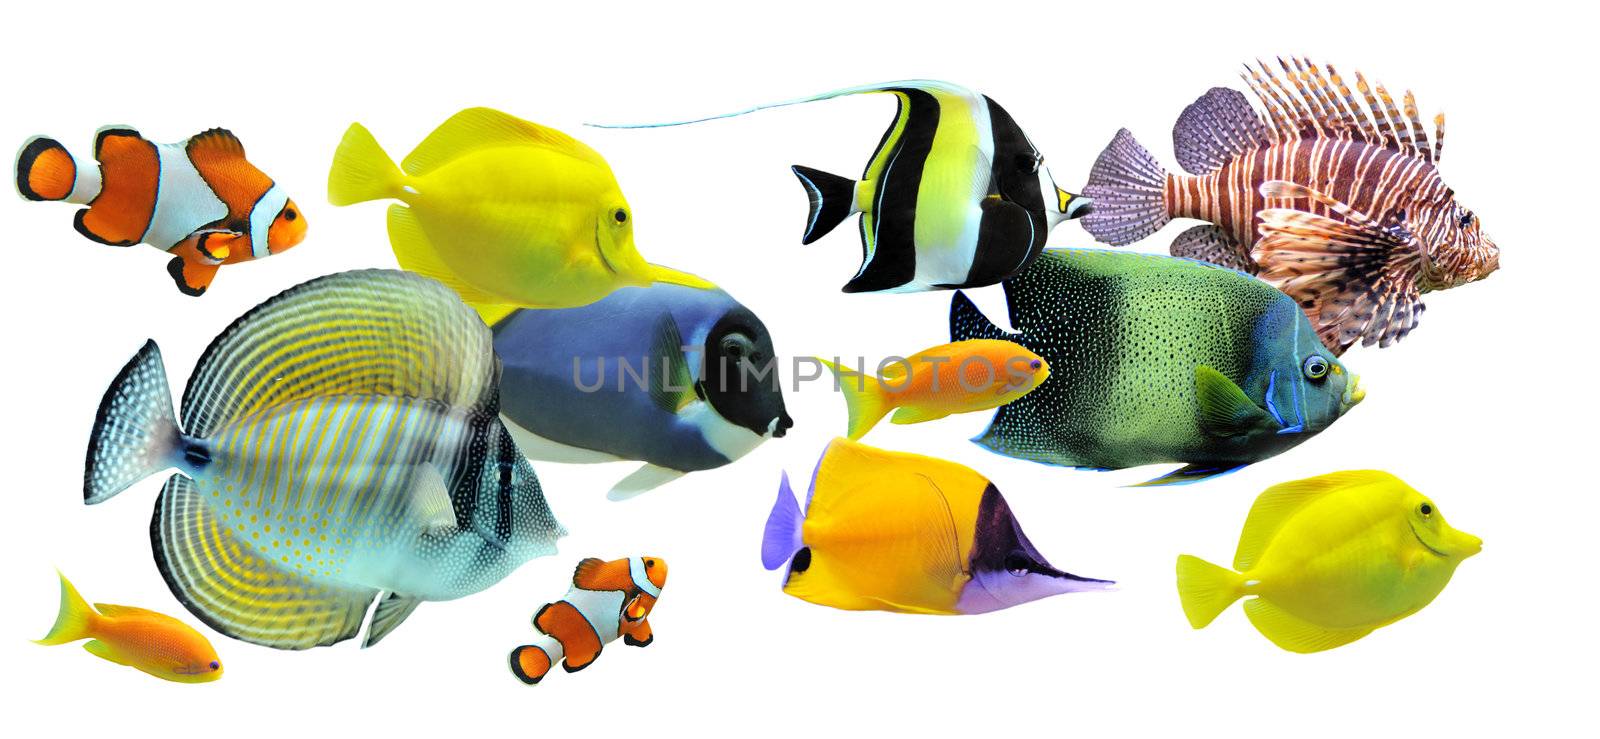 group of fishes by cynoclub